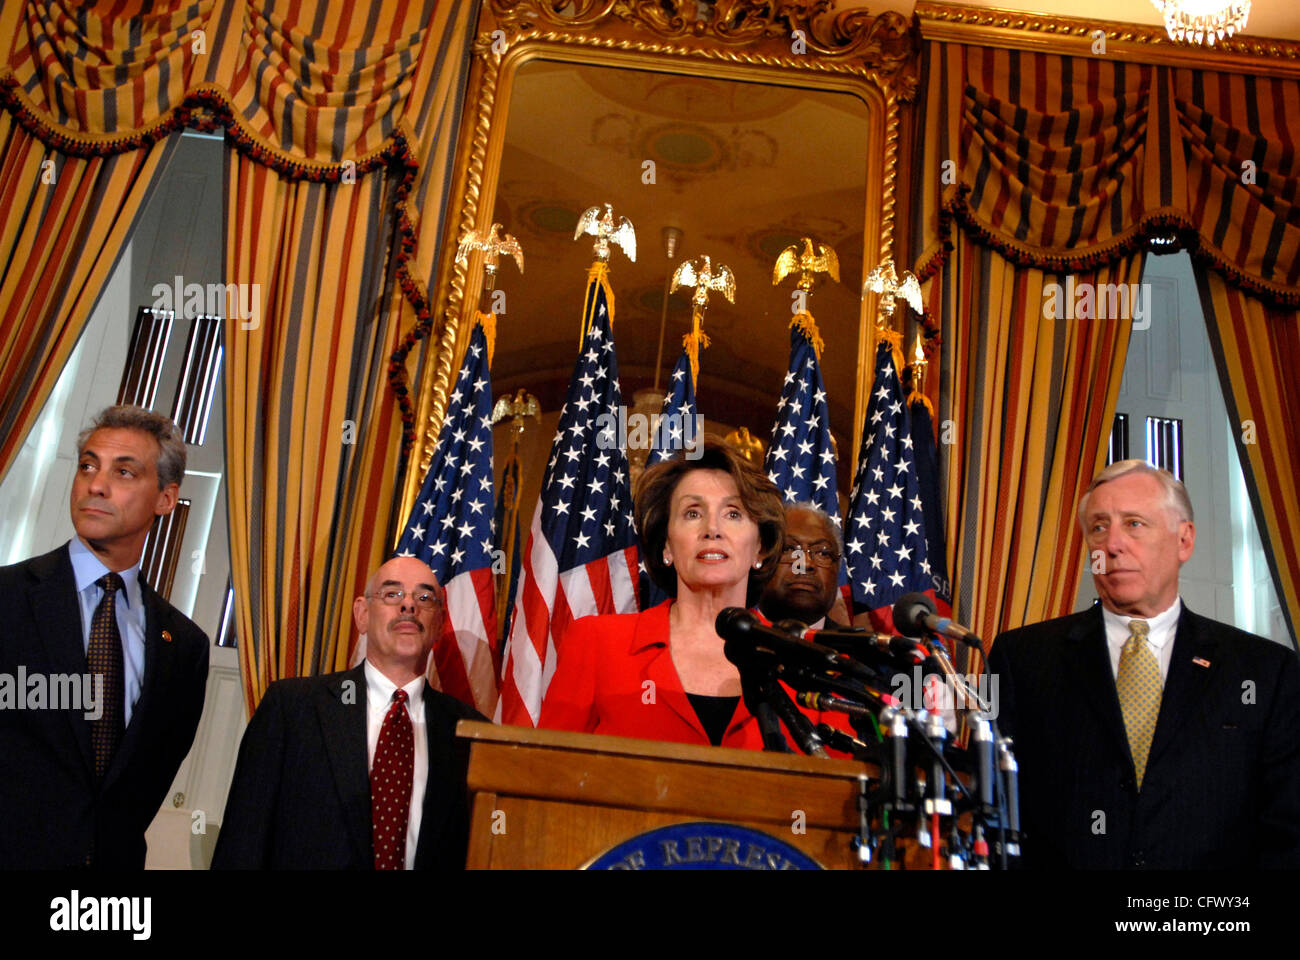 Mar 13, 2007 - Washington, DC, USA - Speaker of the House NANCY PELOSI (D-CA) speaks with reporters about new and upcoming 'accountability legislation,' which House Democrats tout as exercising Congress' check on the expansion of the Executive branch of government. Pelosi appeared with members of th Stock Photo